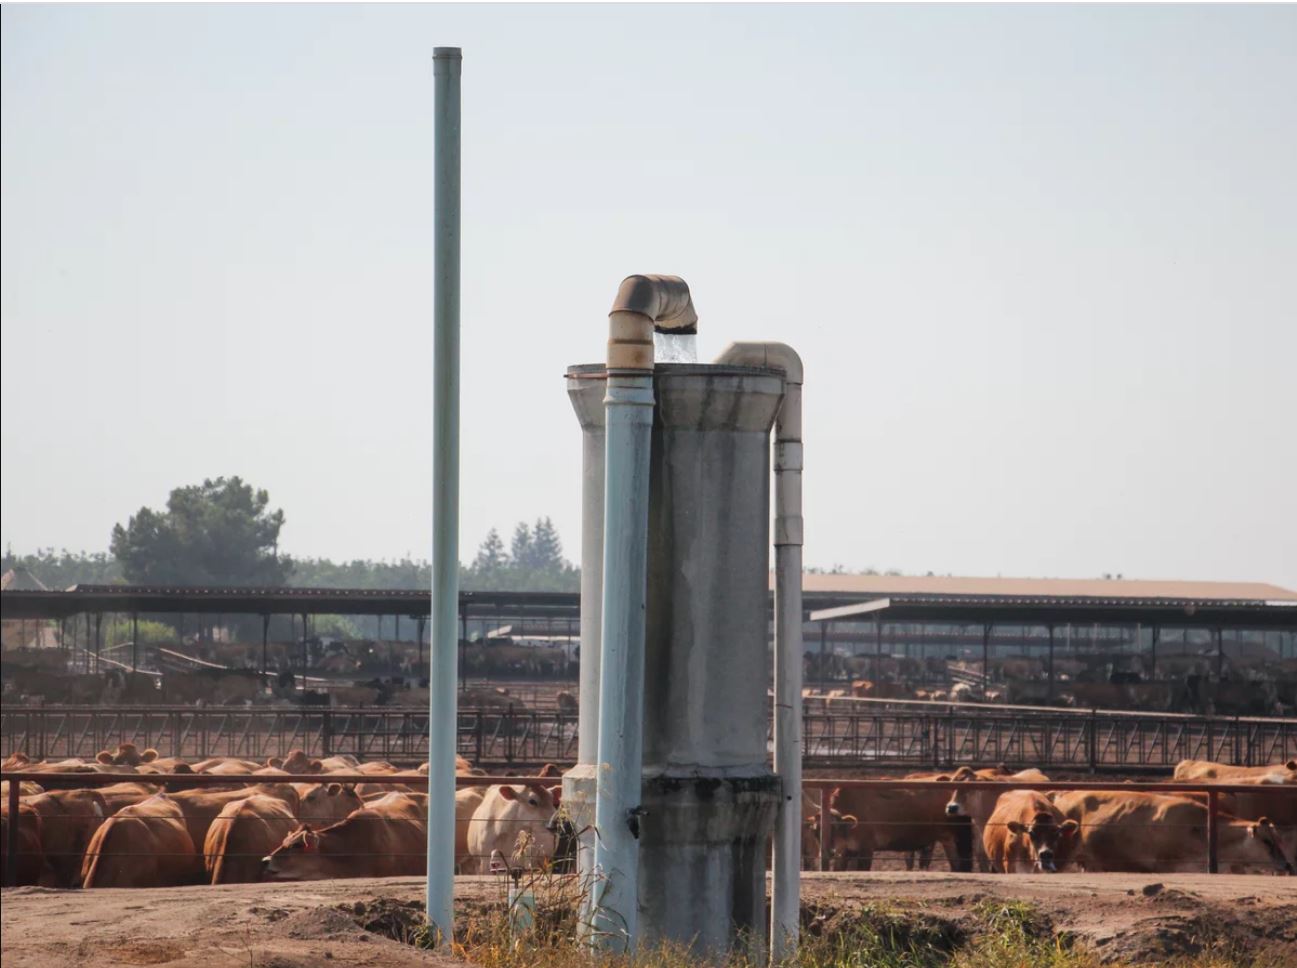 Dozens of cows are gathered inside a closed space. Nearby is a metal well with many tubes sticking out.